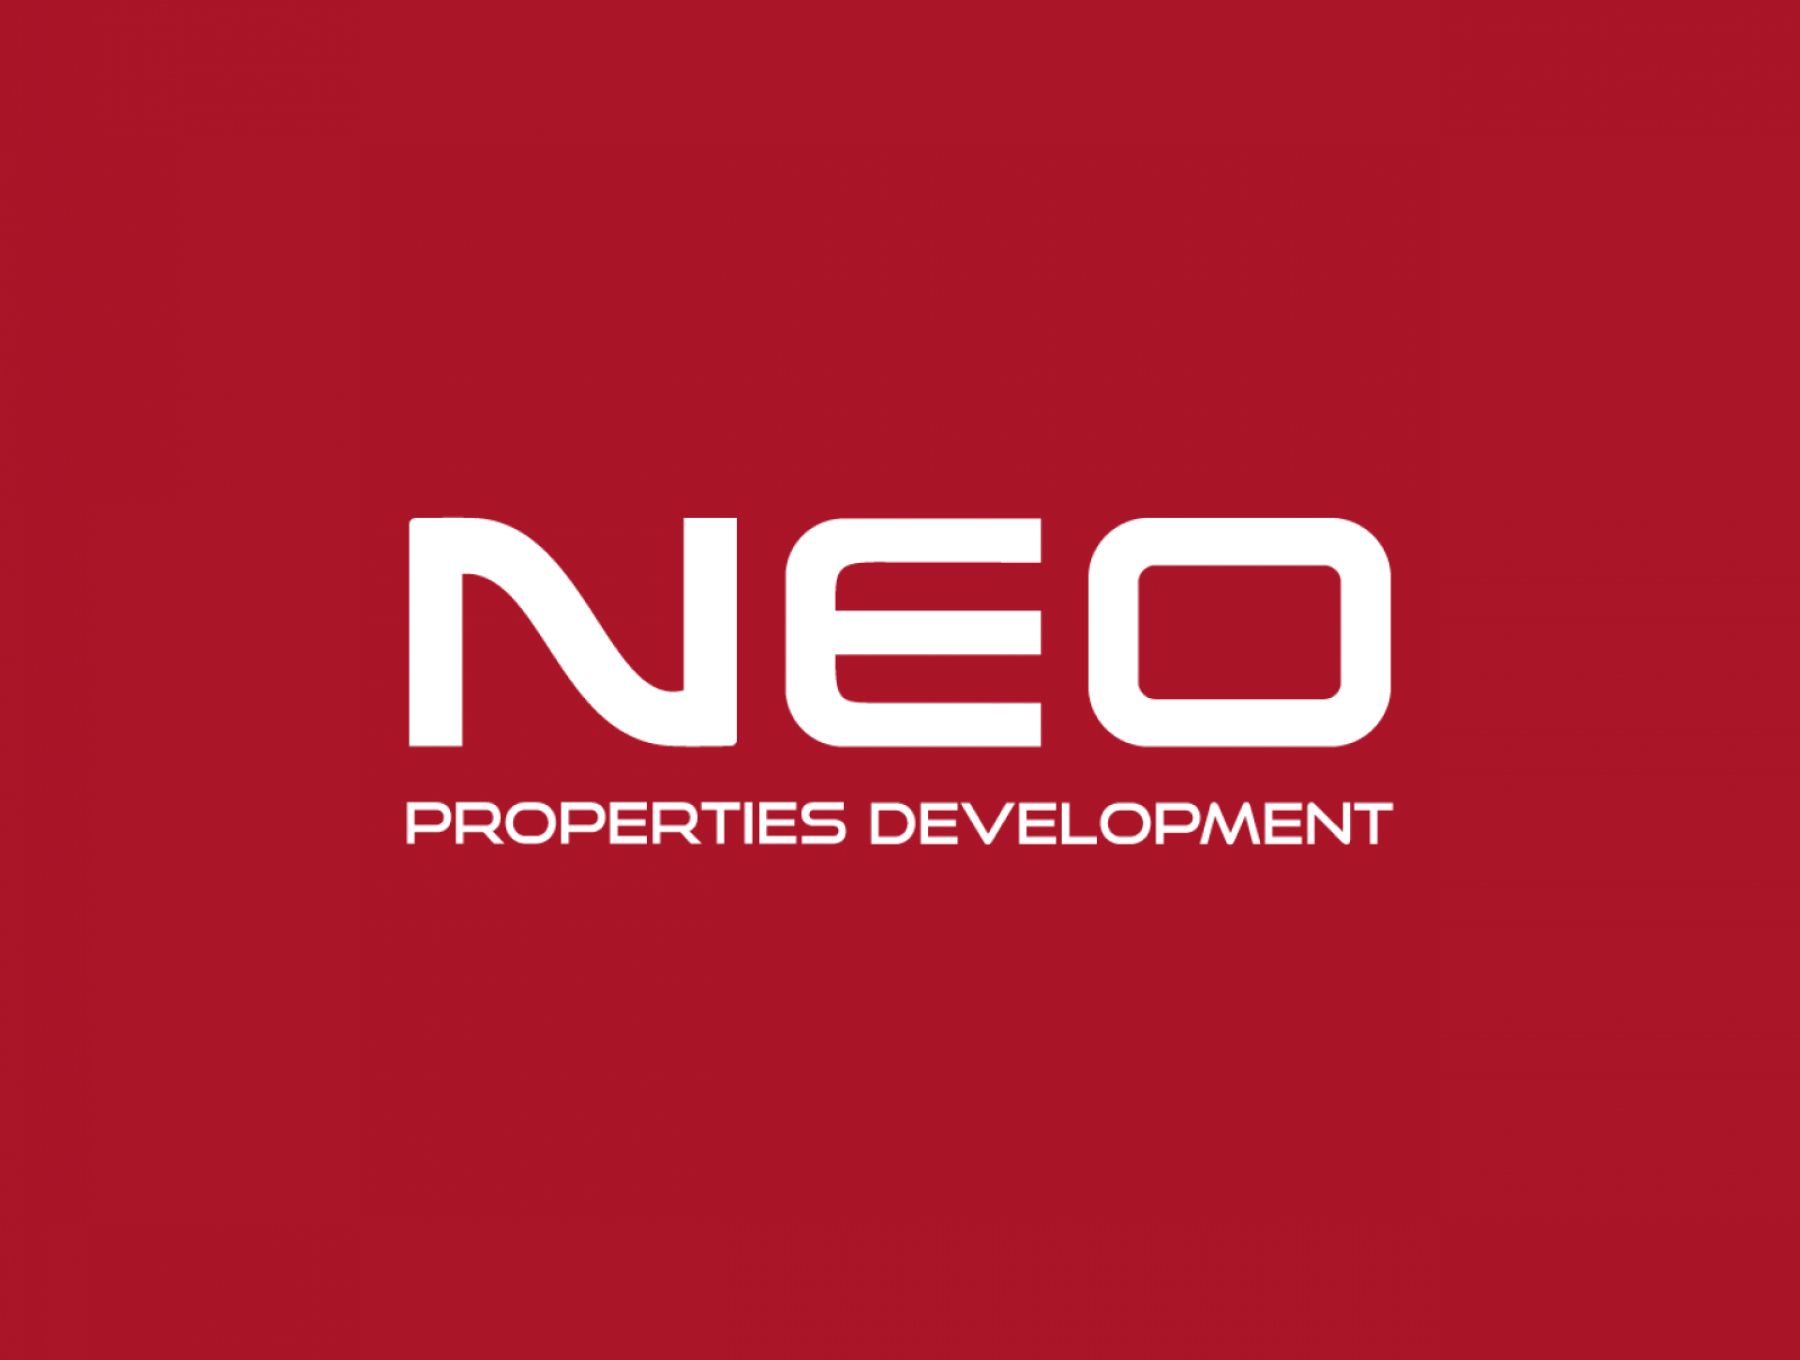 One United Properties S.A. develops a new residential division – Neo